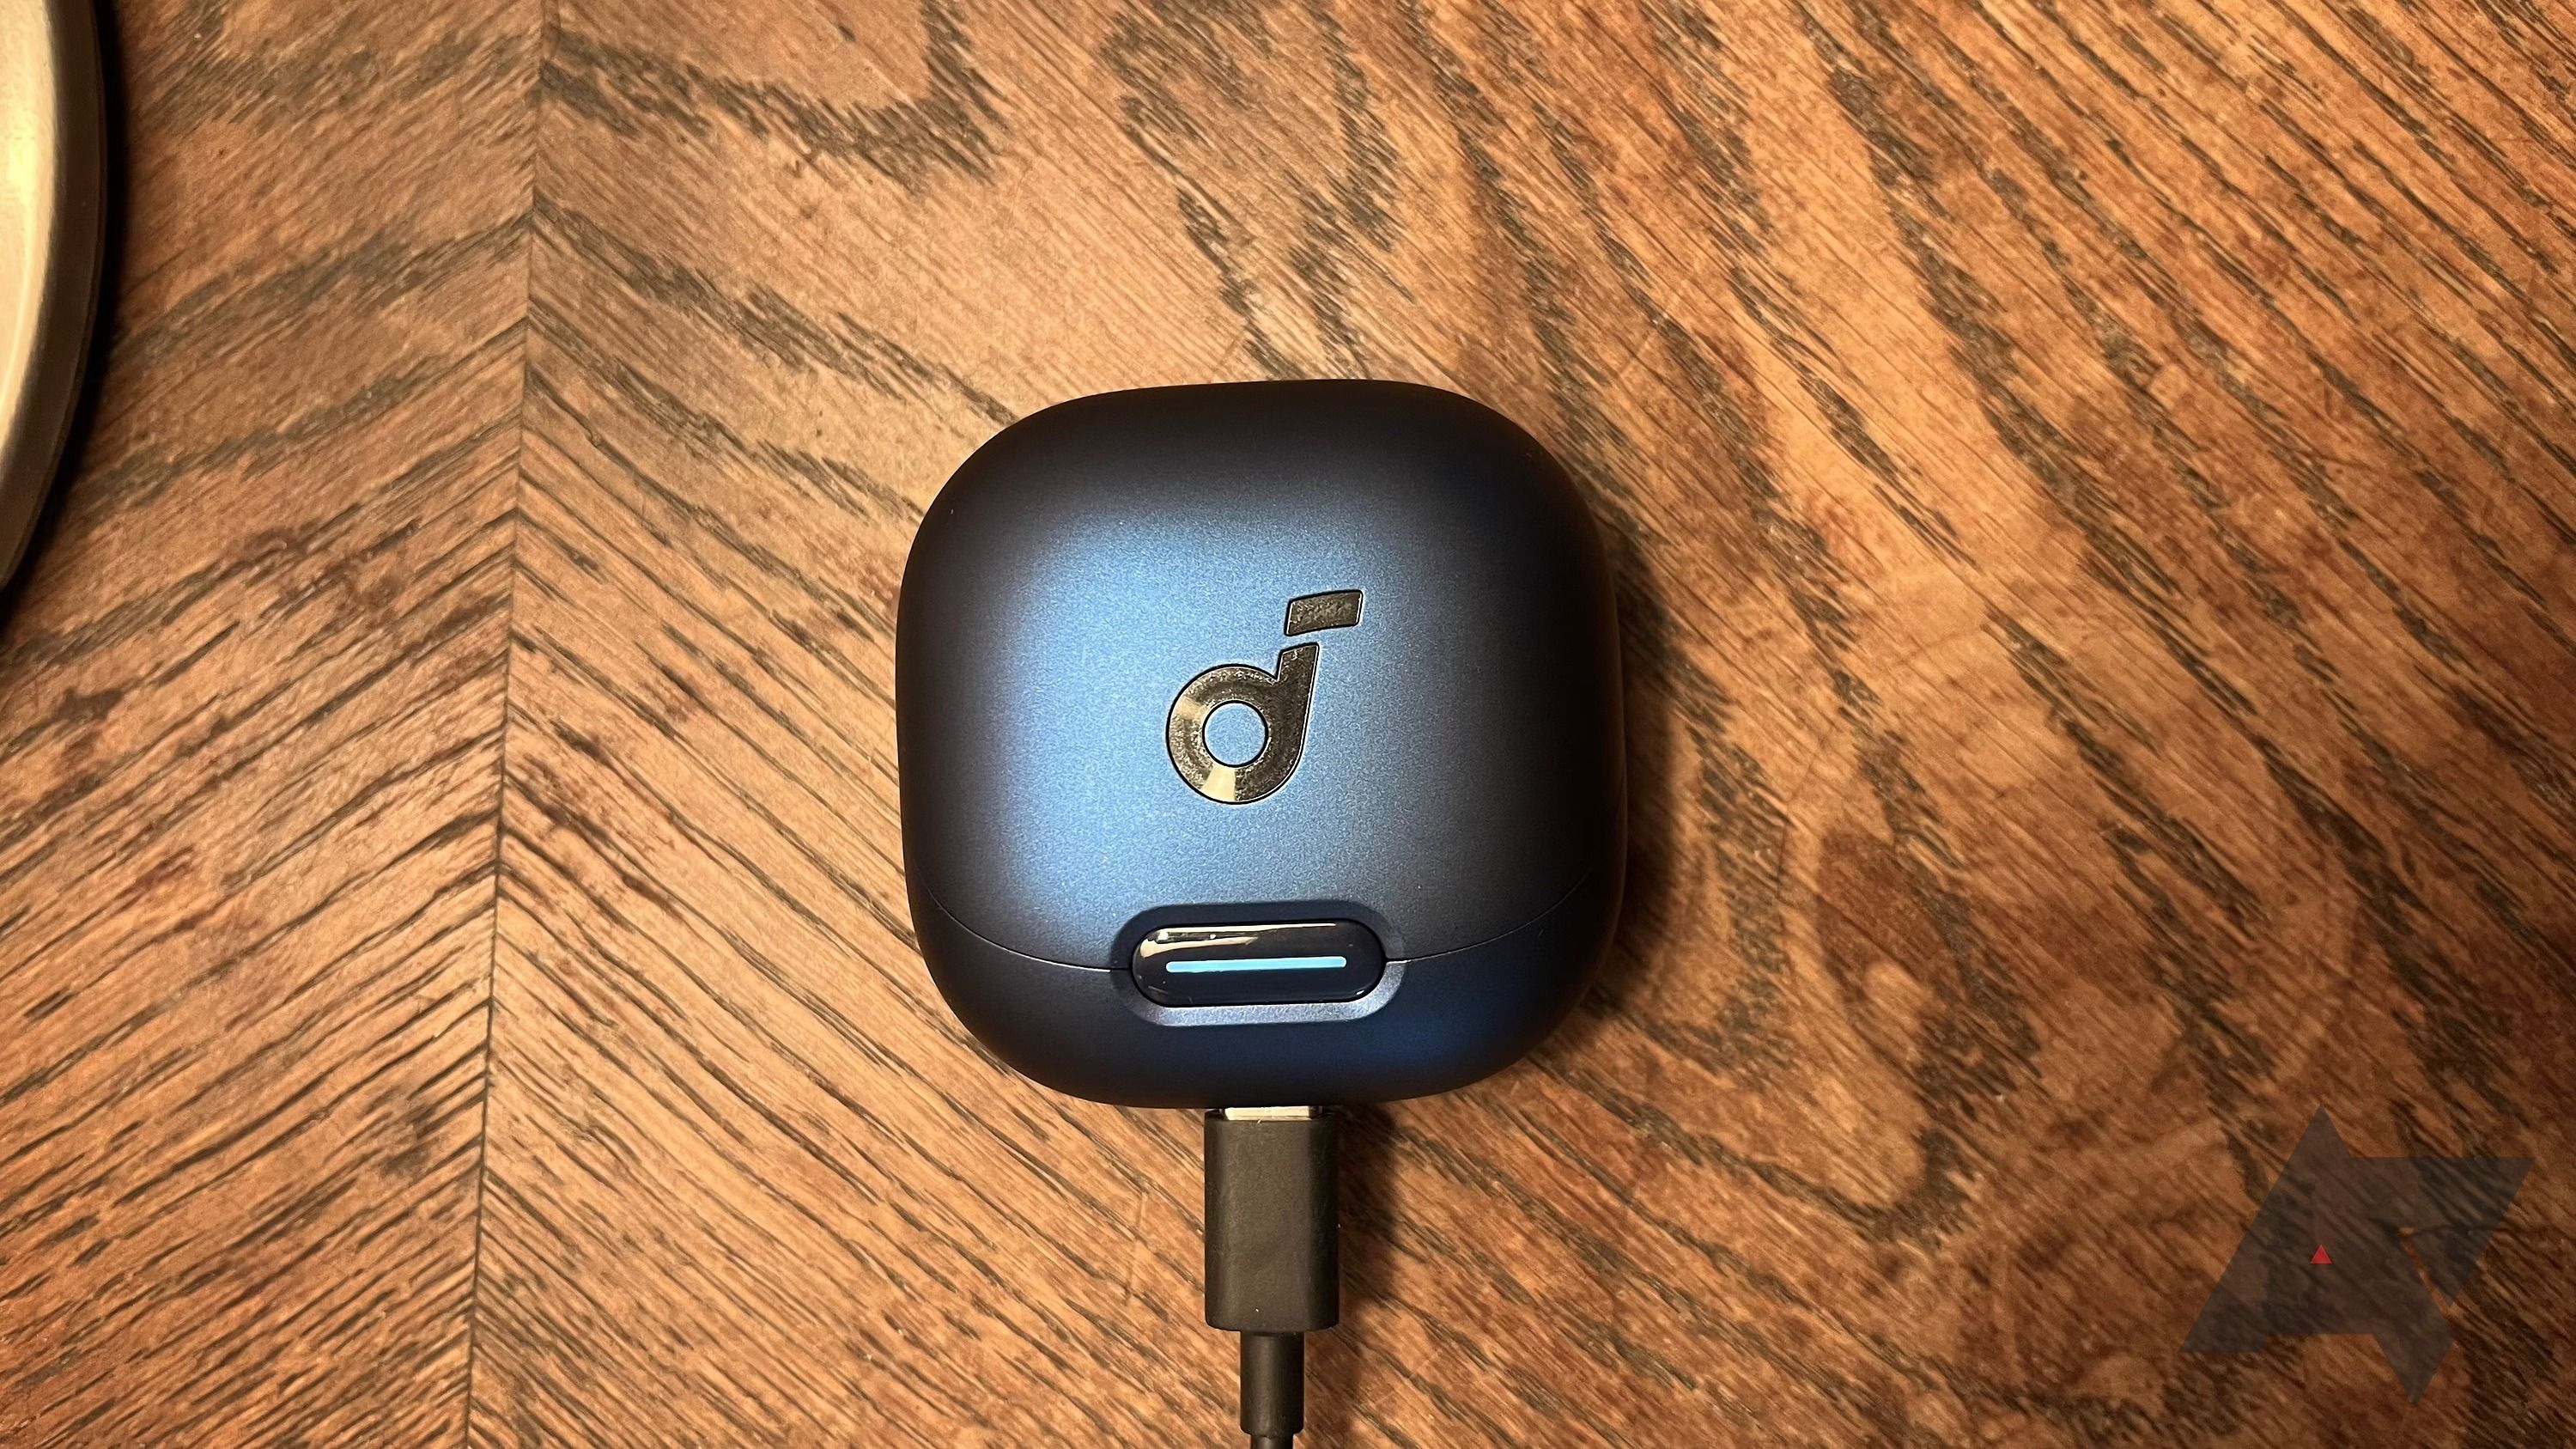 Anker Soundcore Liberty 4 NC Review: Improved Design & Noise-Free Sound -  AppleGadgets Blog